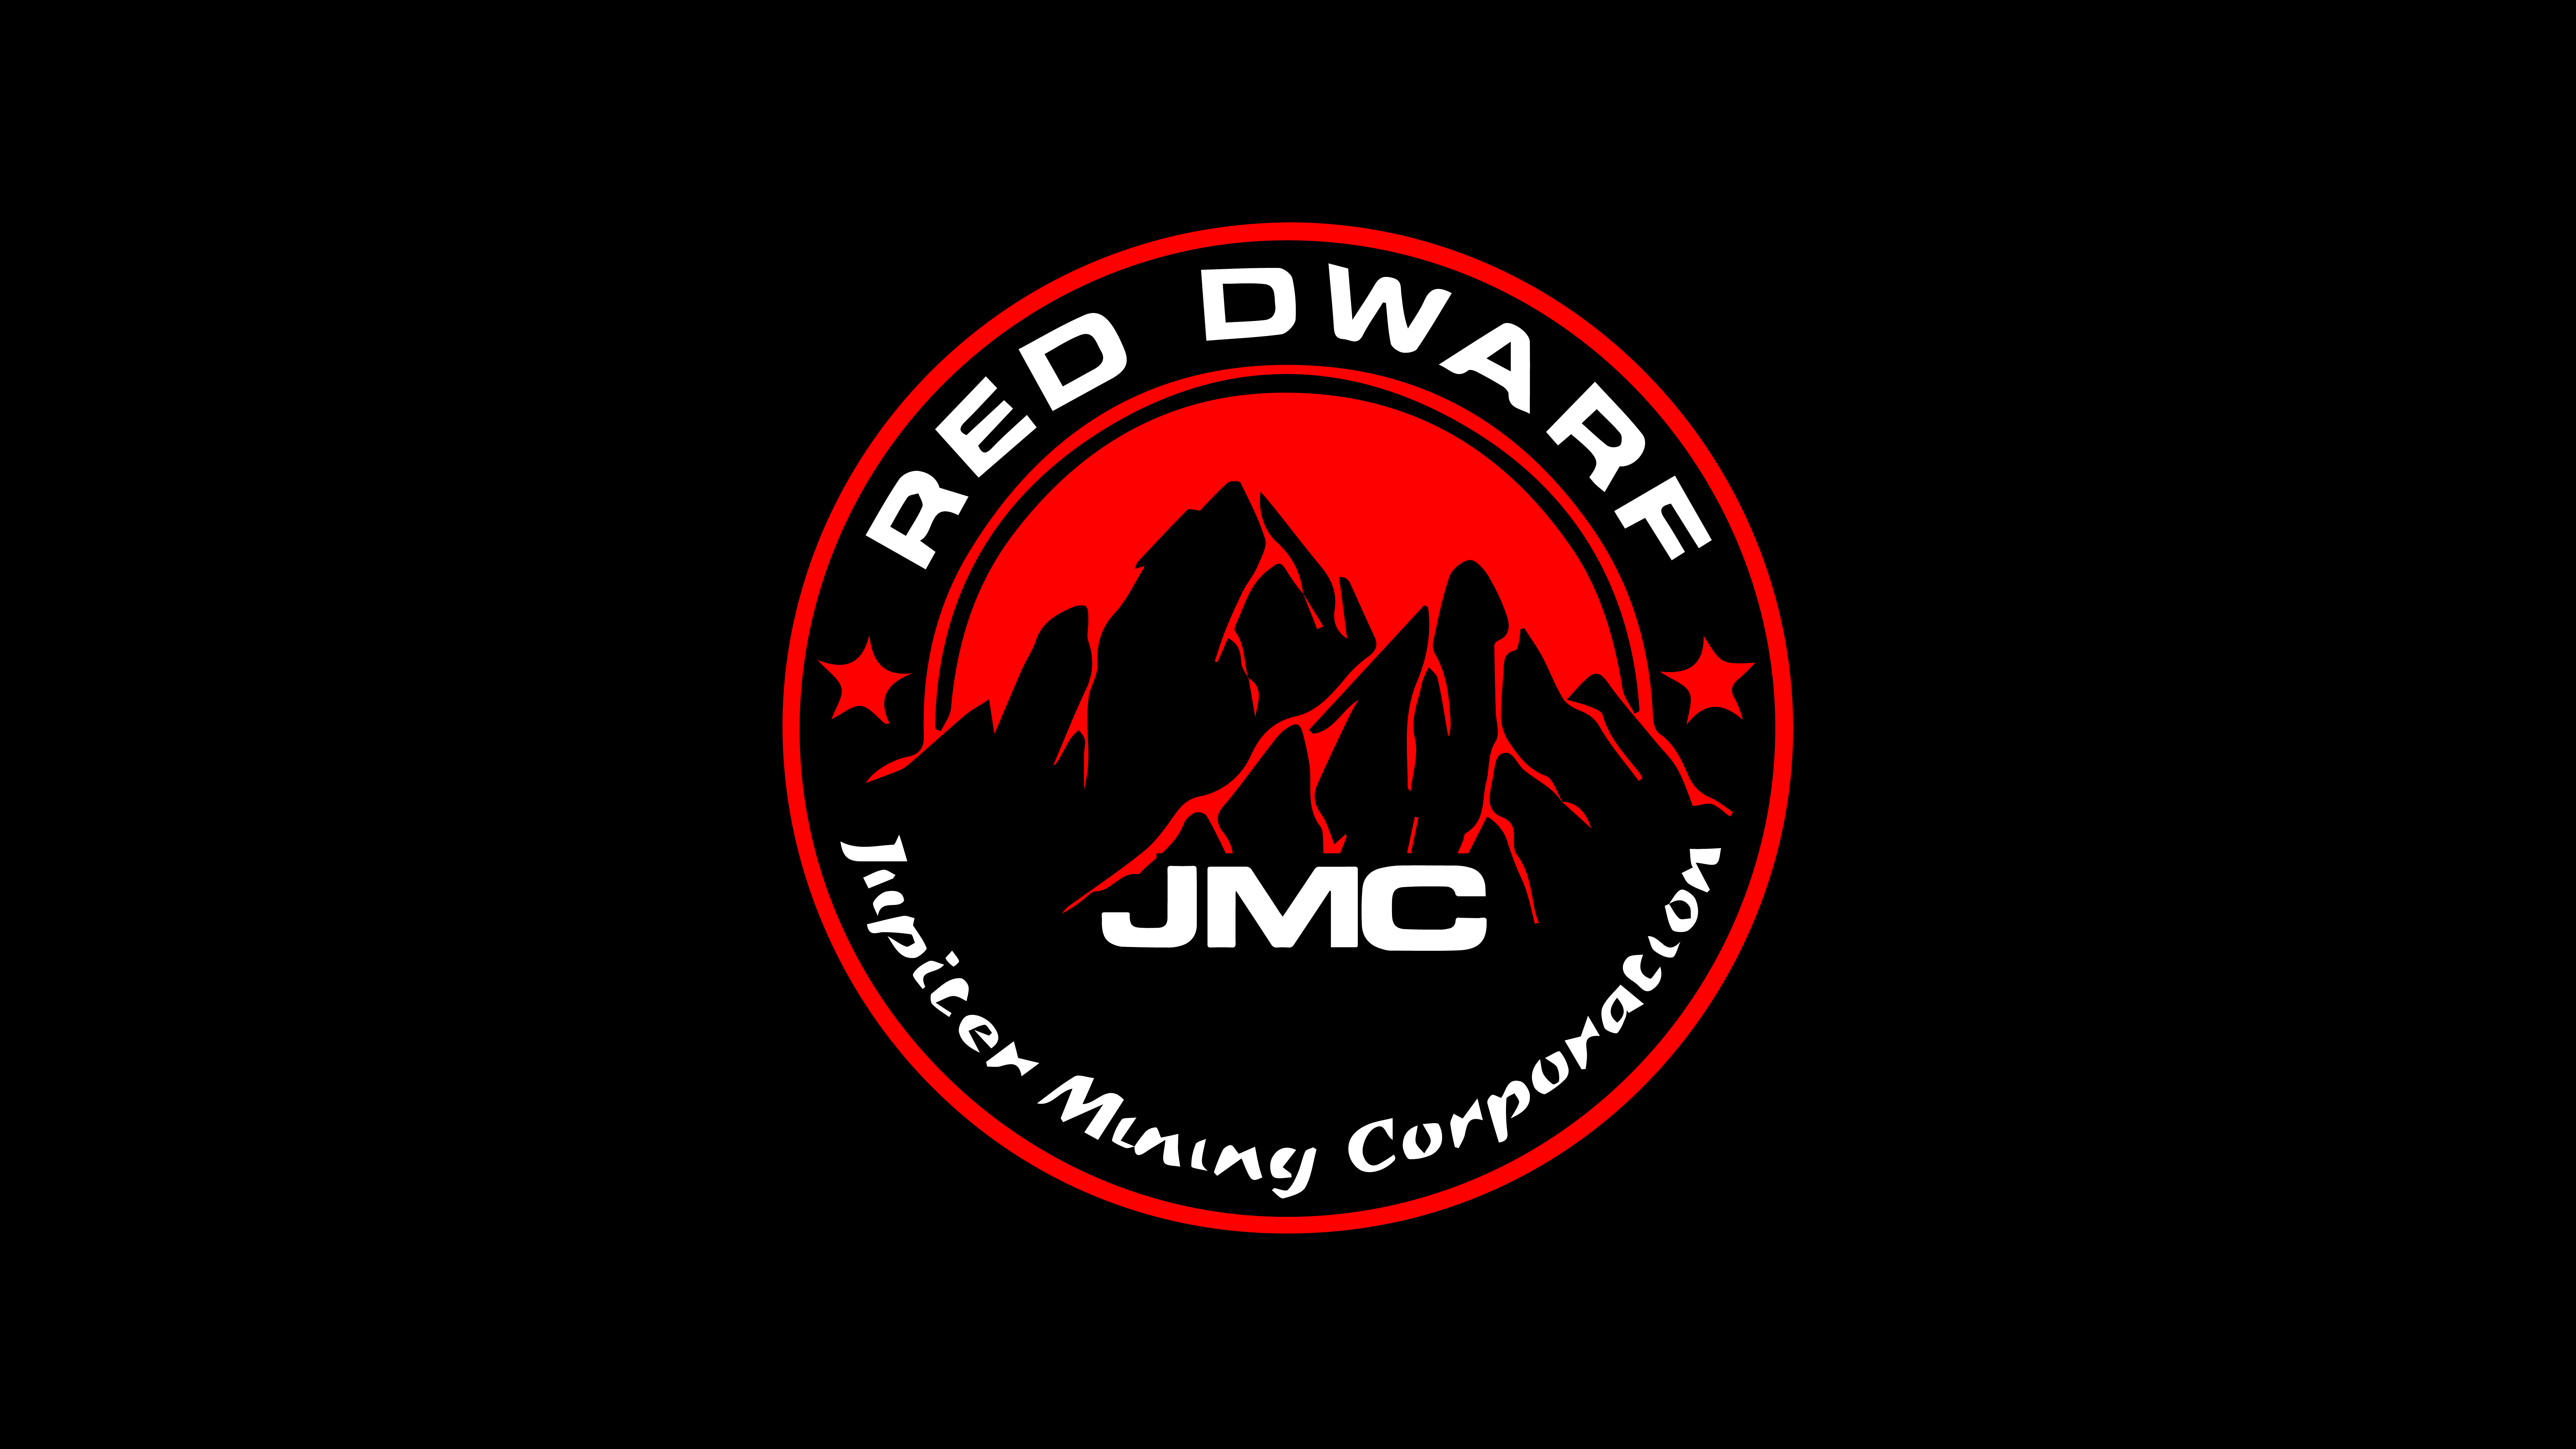 Red Dwarf Wallpapers